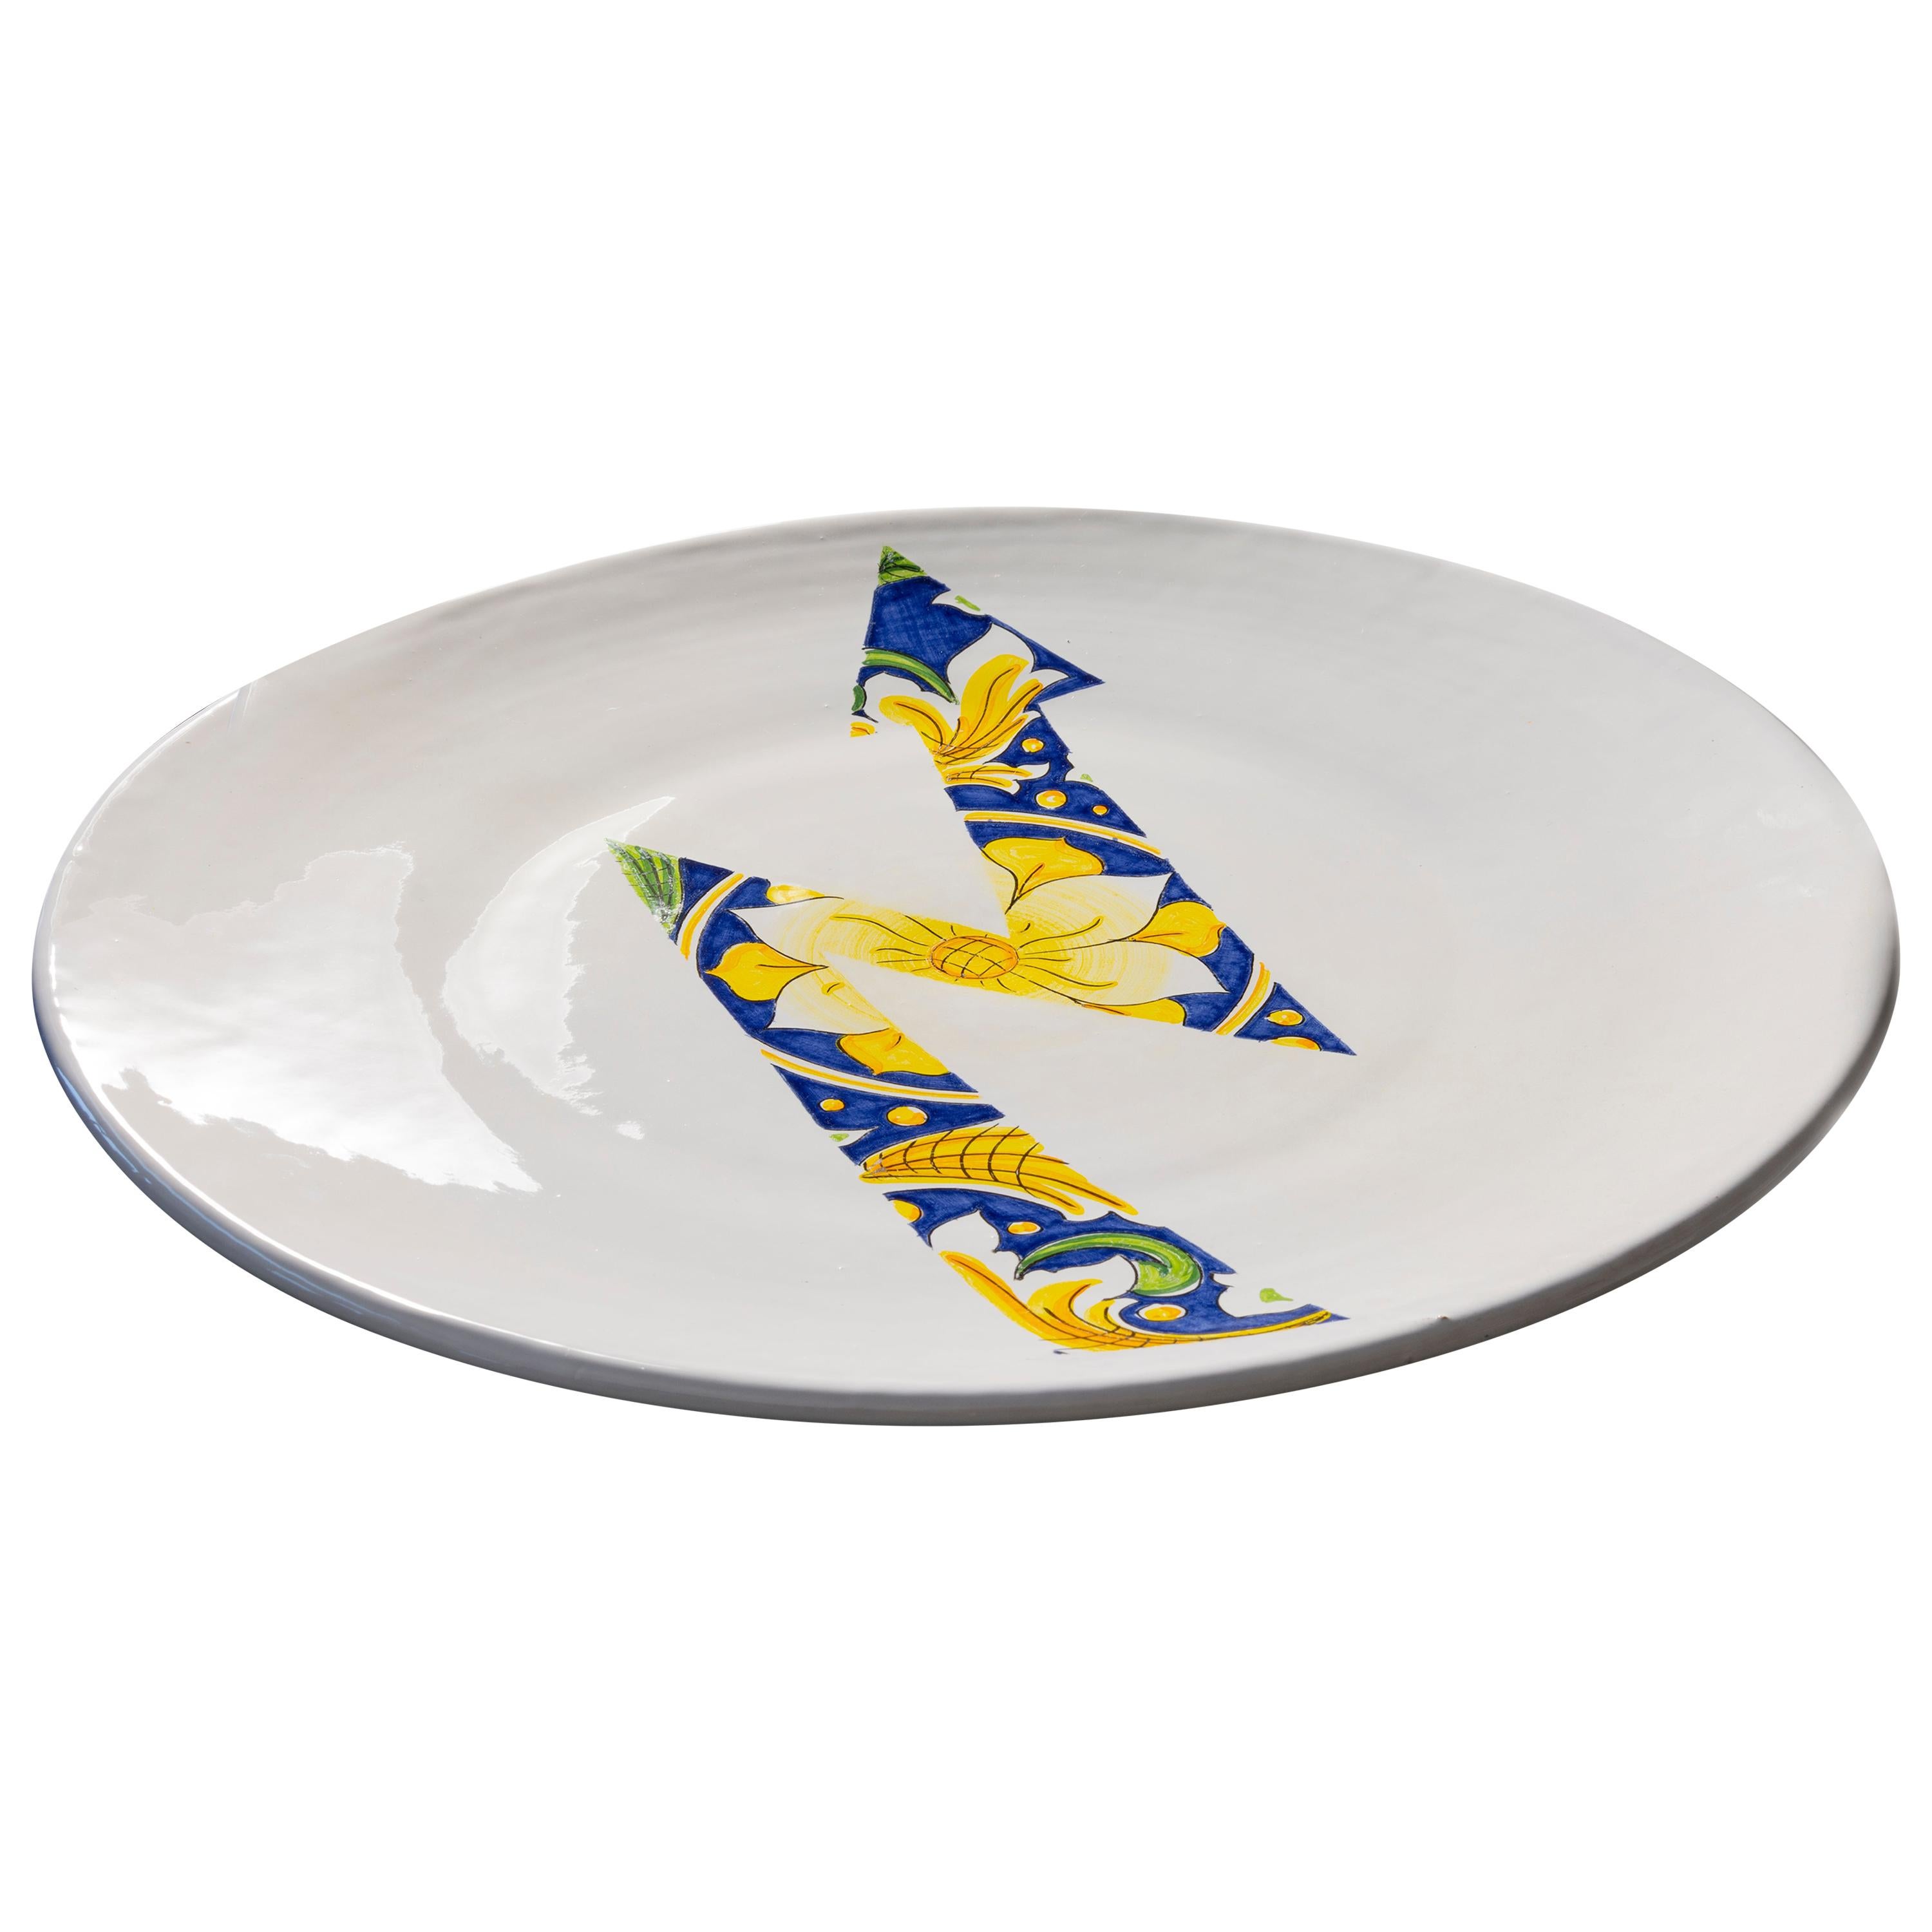 Ceramic Plate by Pantoù Ceramics Hand Painted Glazed Earthenware Contemporary For Sale